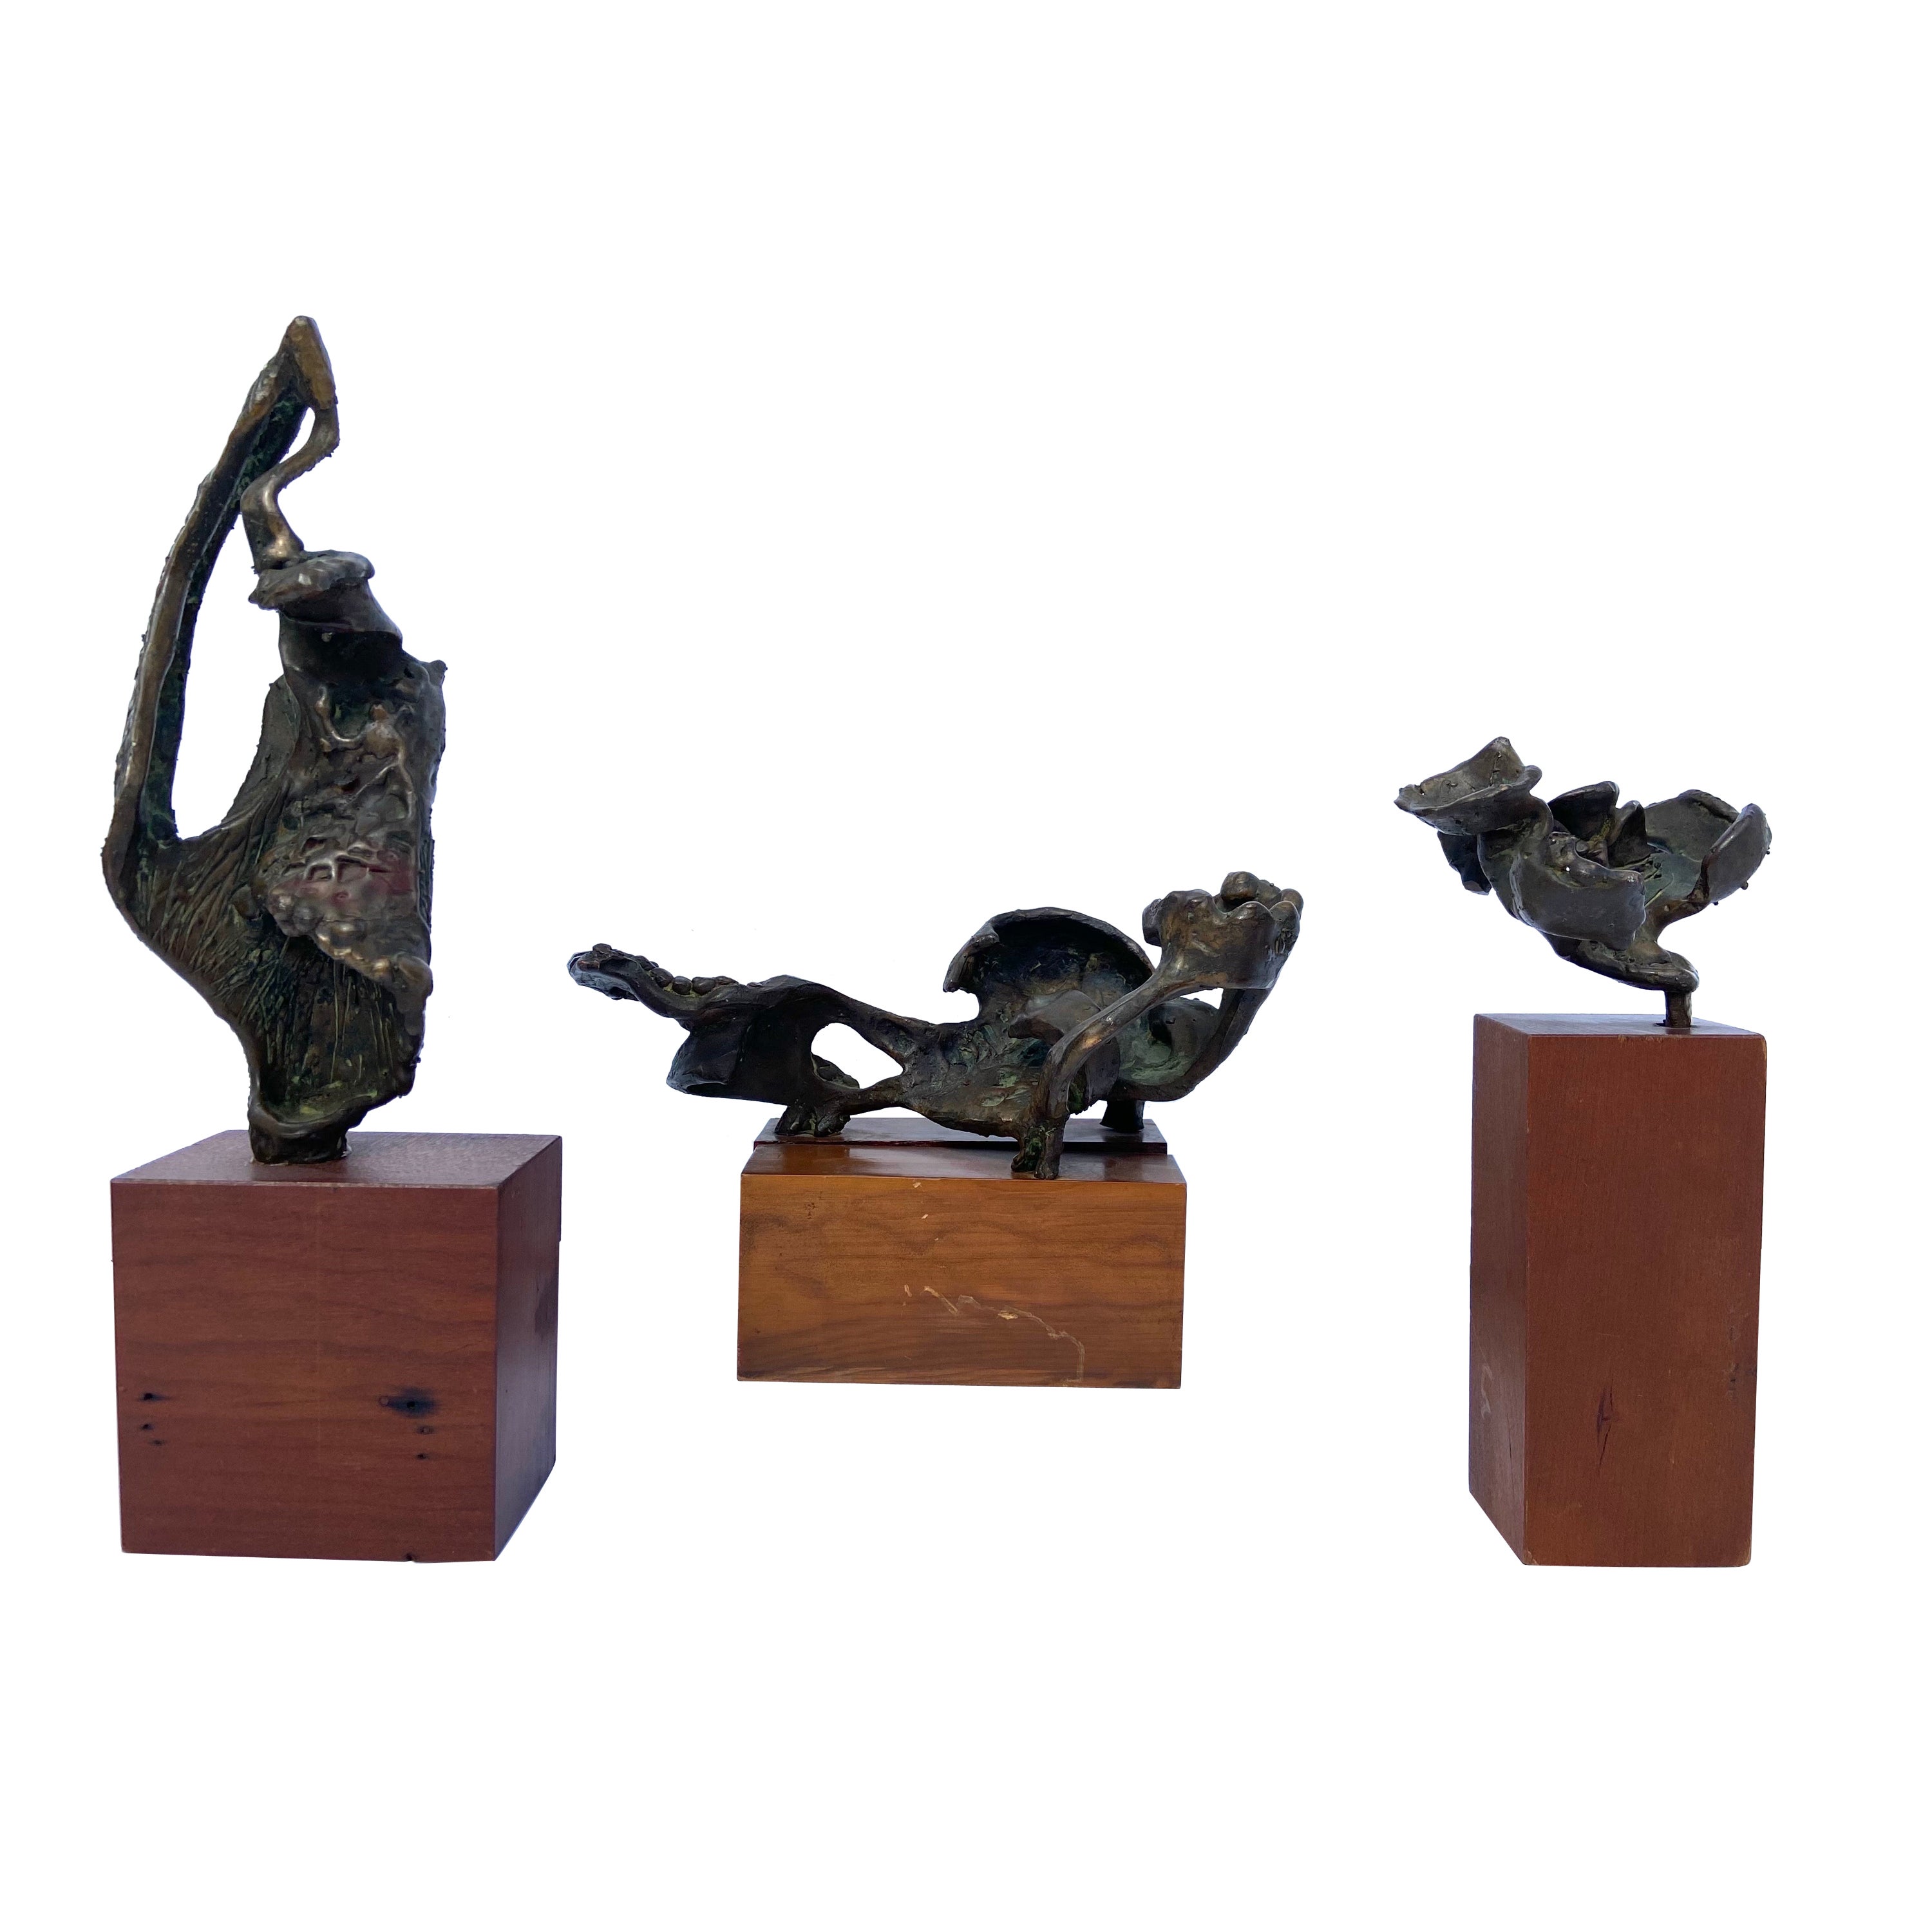 Set of 3 Brutalist Abstract Vintage 20th Century Bronze Sculptures on Wood Bases